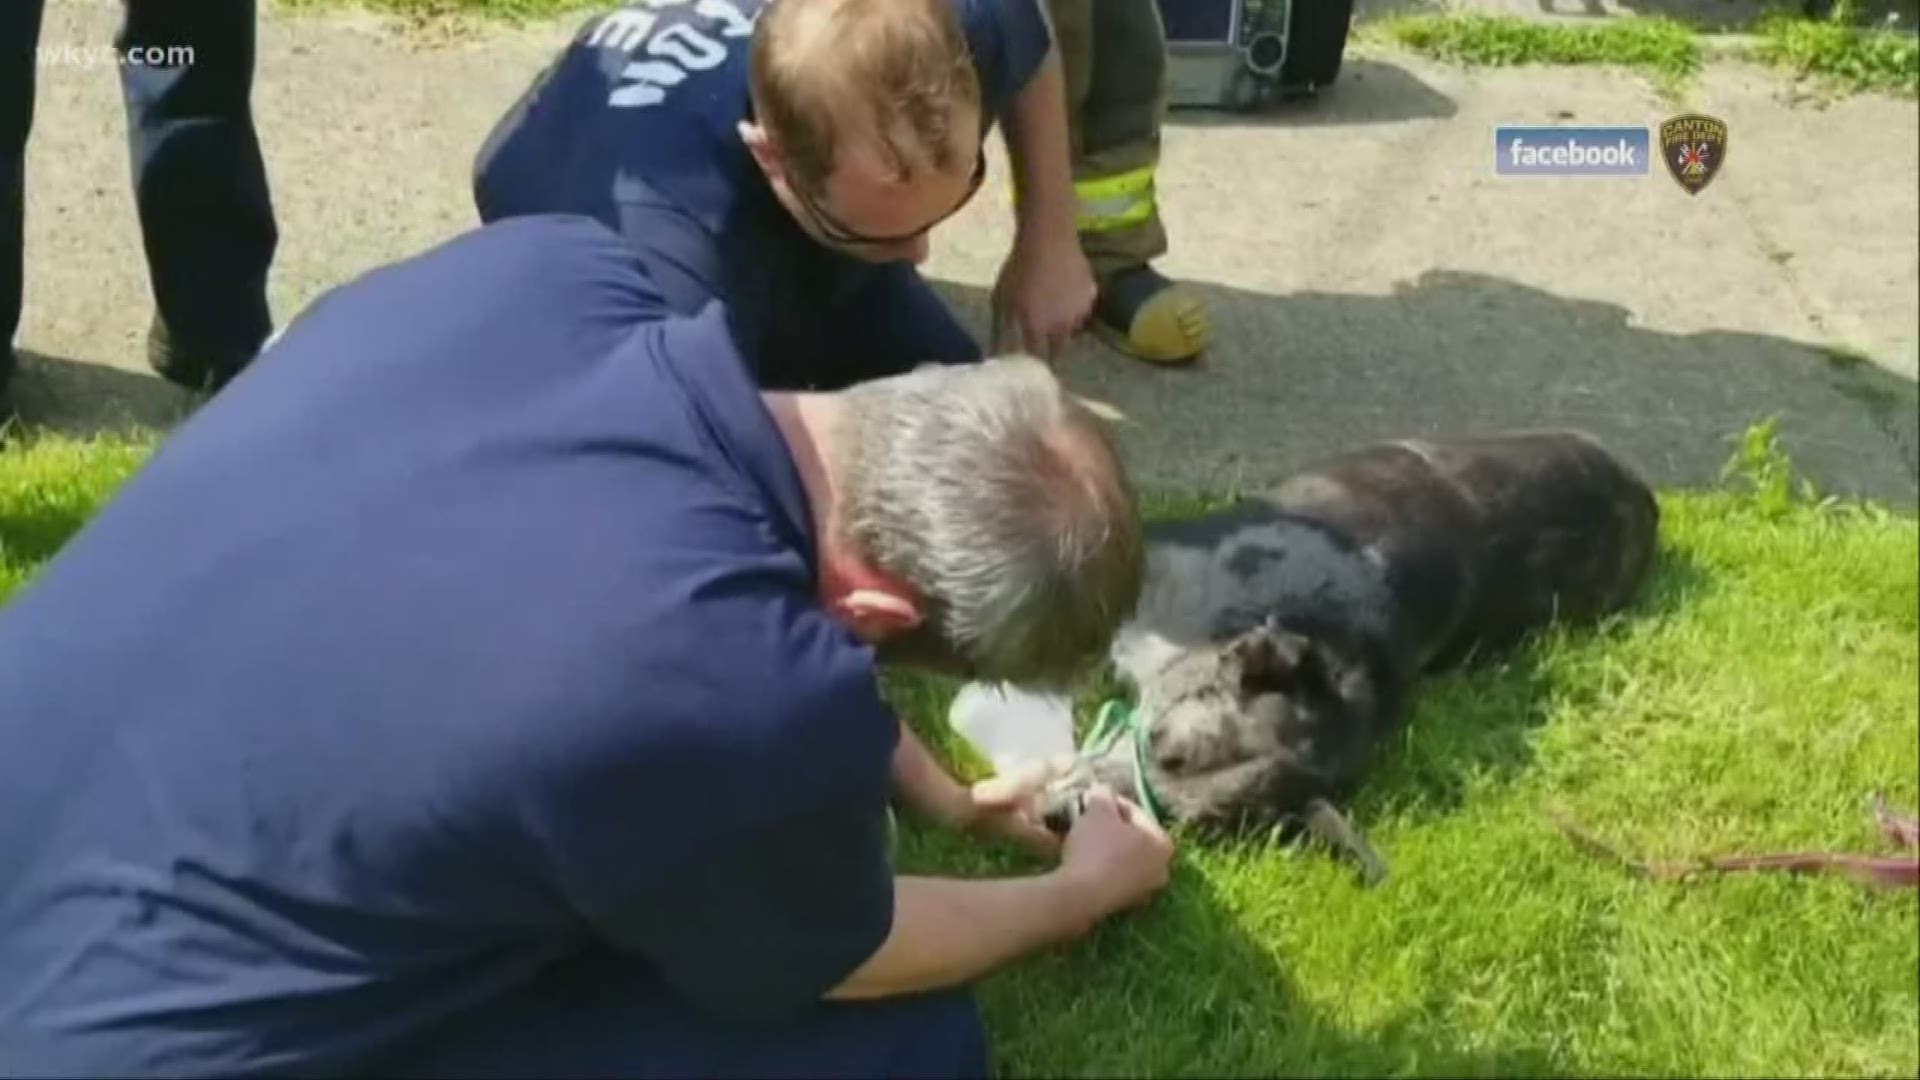 On Tuesday, the Canton City Fire Department showed just what it means to go the extra mile as they rescued Dolly the dog from a burning house.